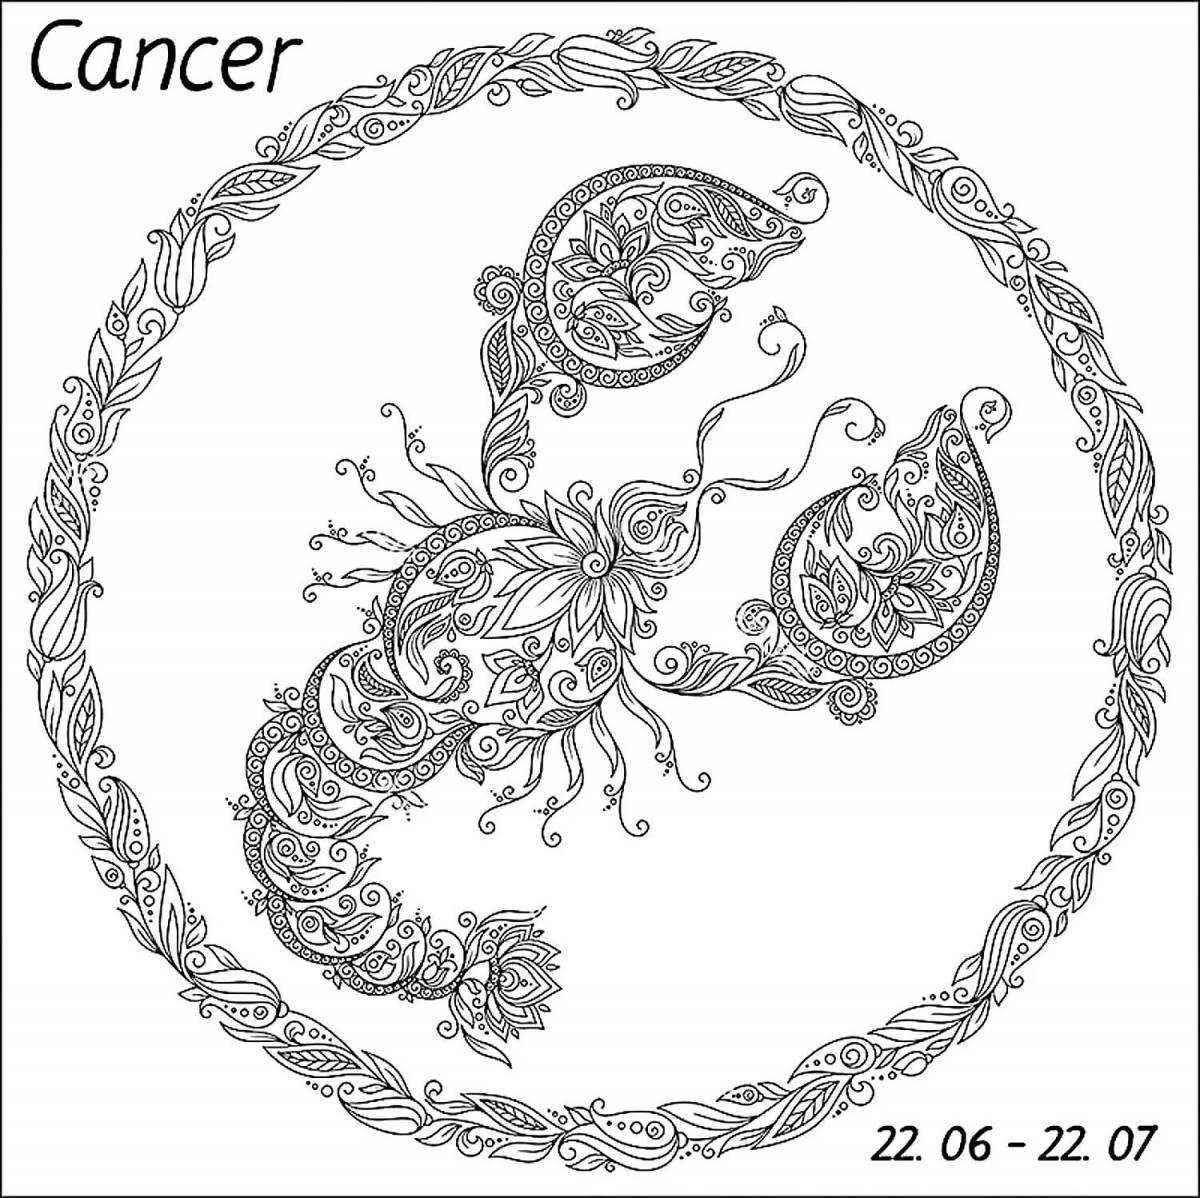 Fancy coloring of cancer